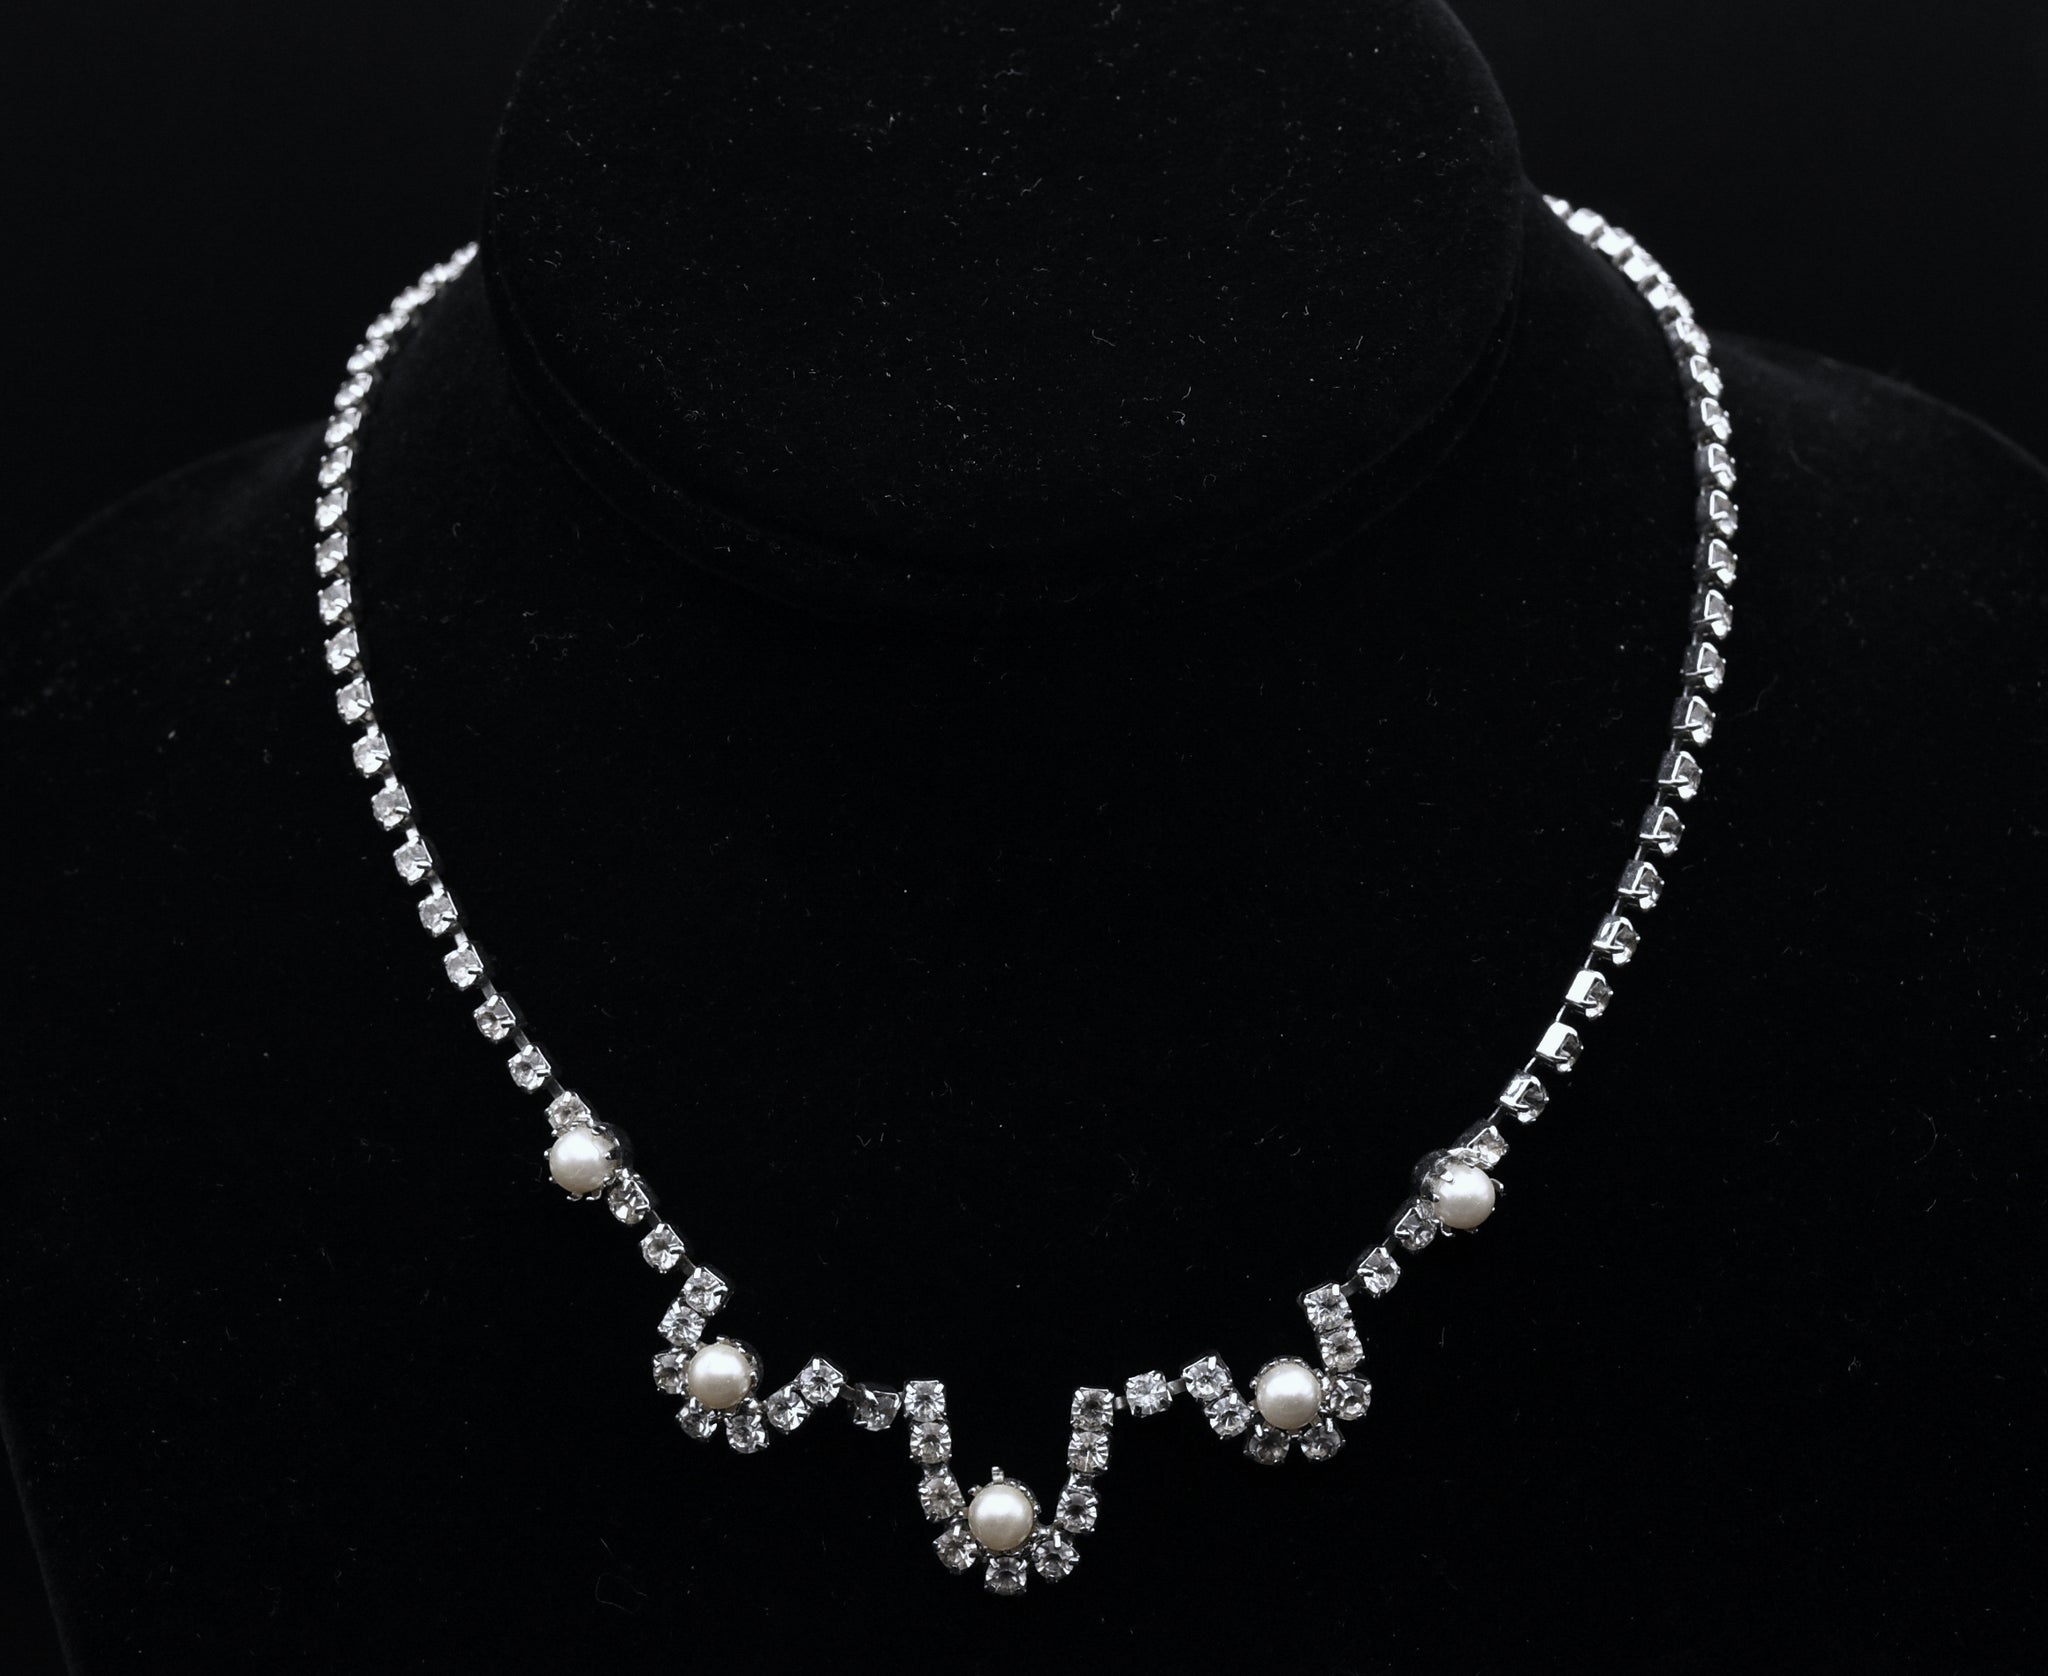 Vintage Silver Tone Rhinestone and Faux Pearl Necklace - 15.5"